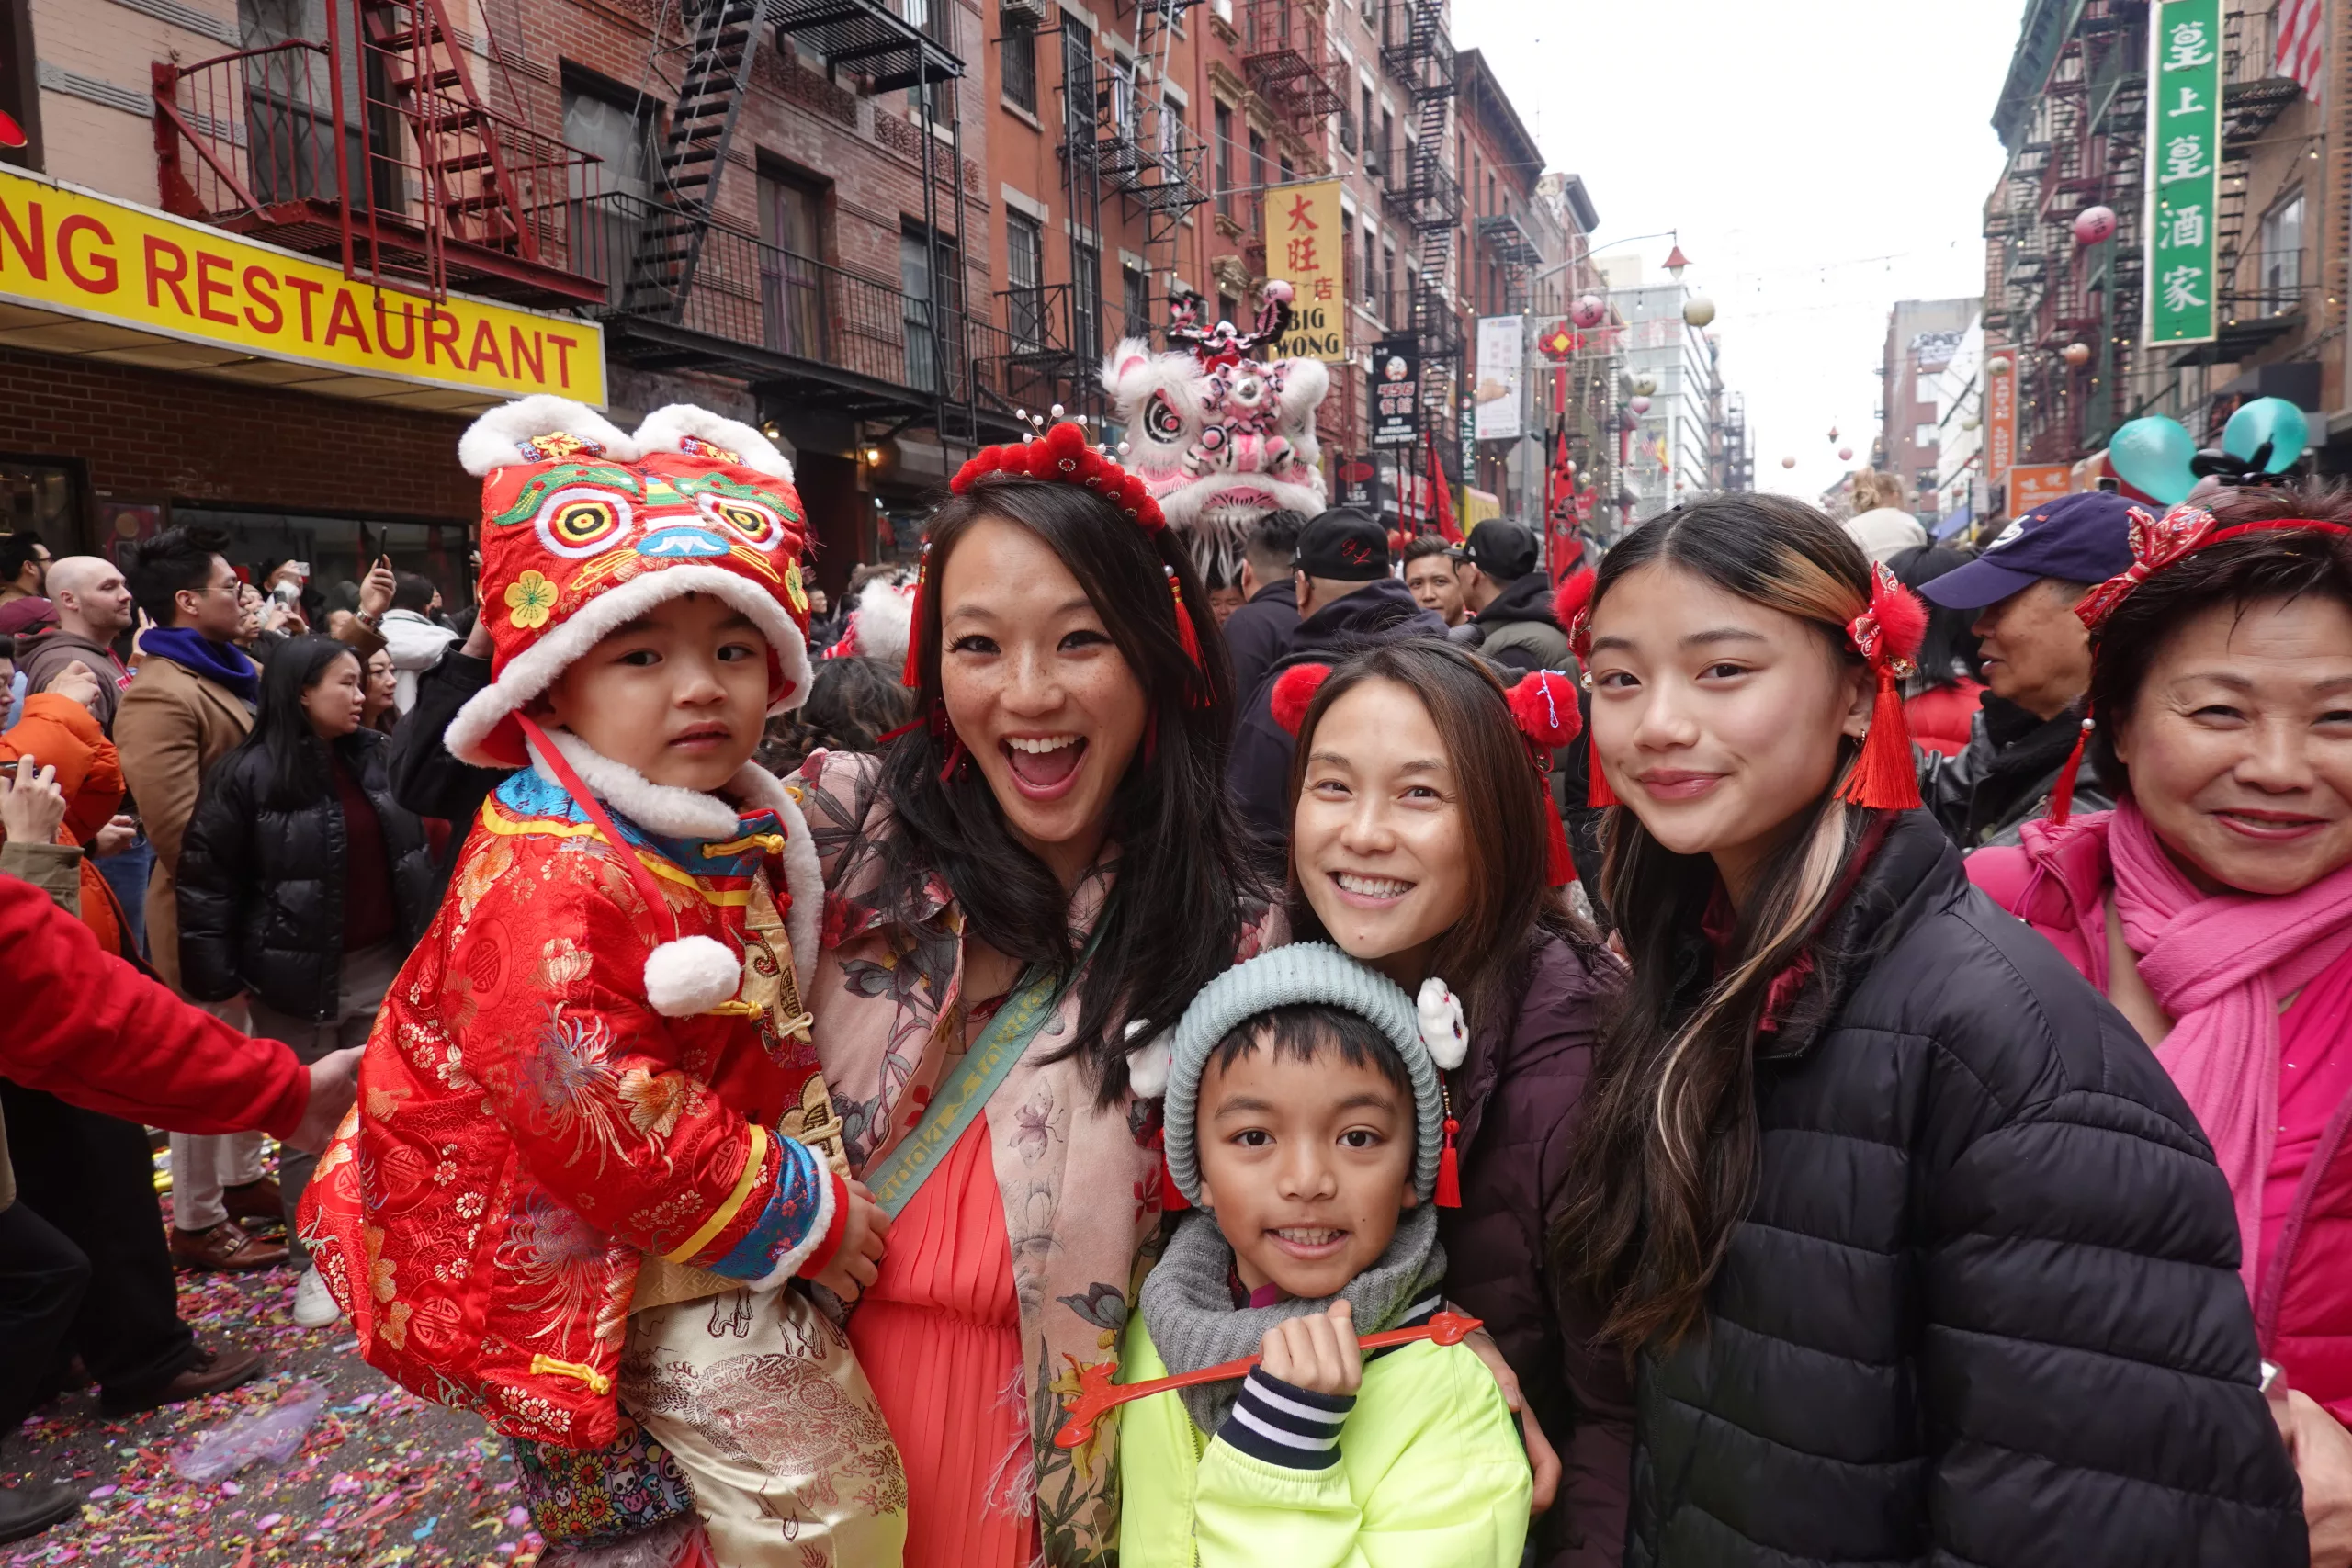 Lunar New Year Parade NYC Chinatown Celebrates Annual Firecracker